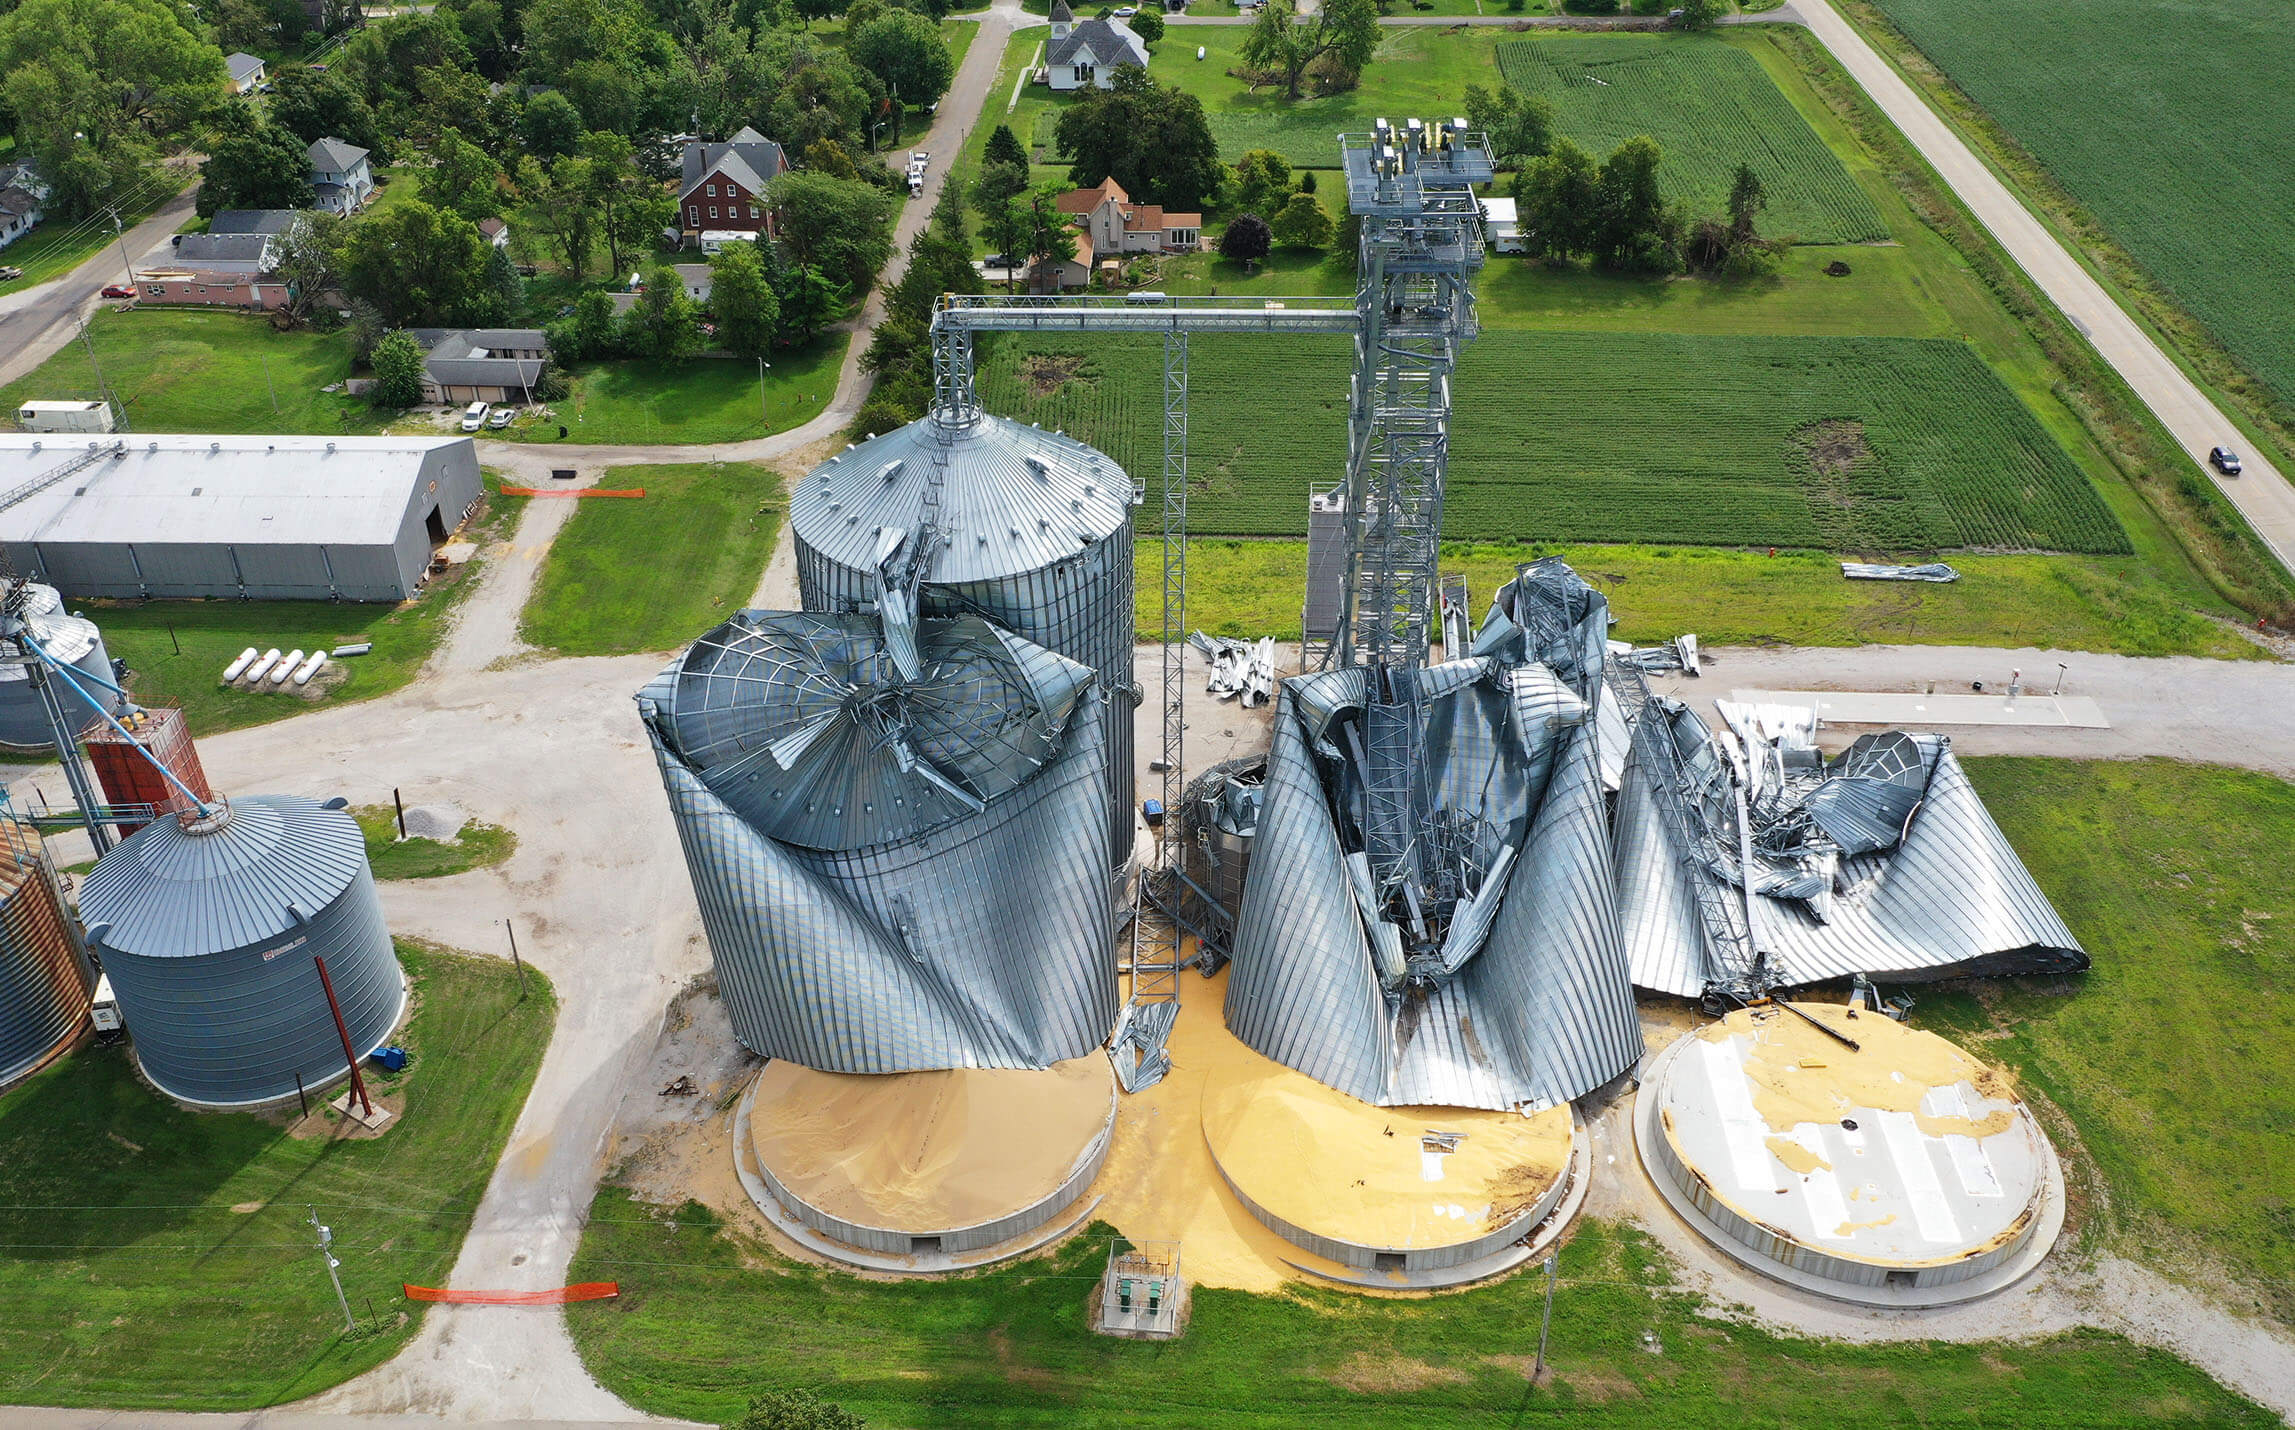 Smashed grain bins with leftover corn on ground lay fal